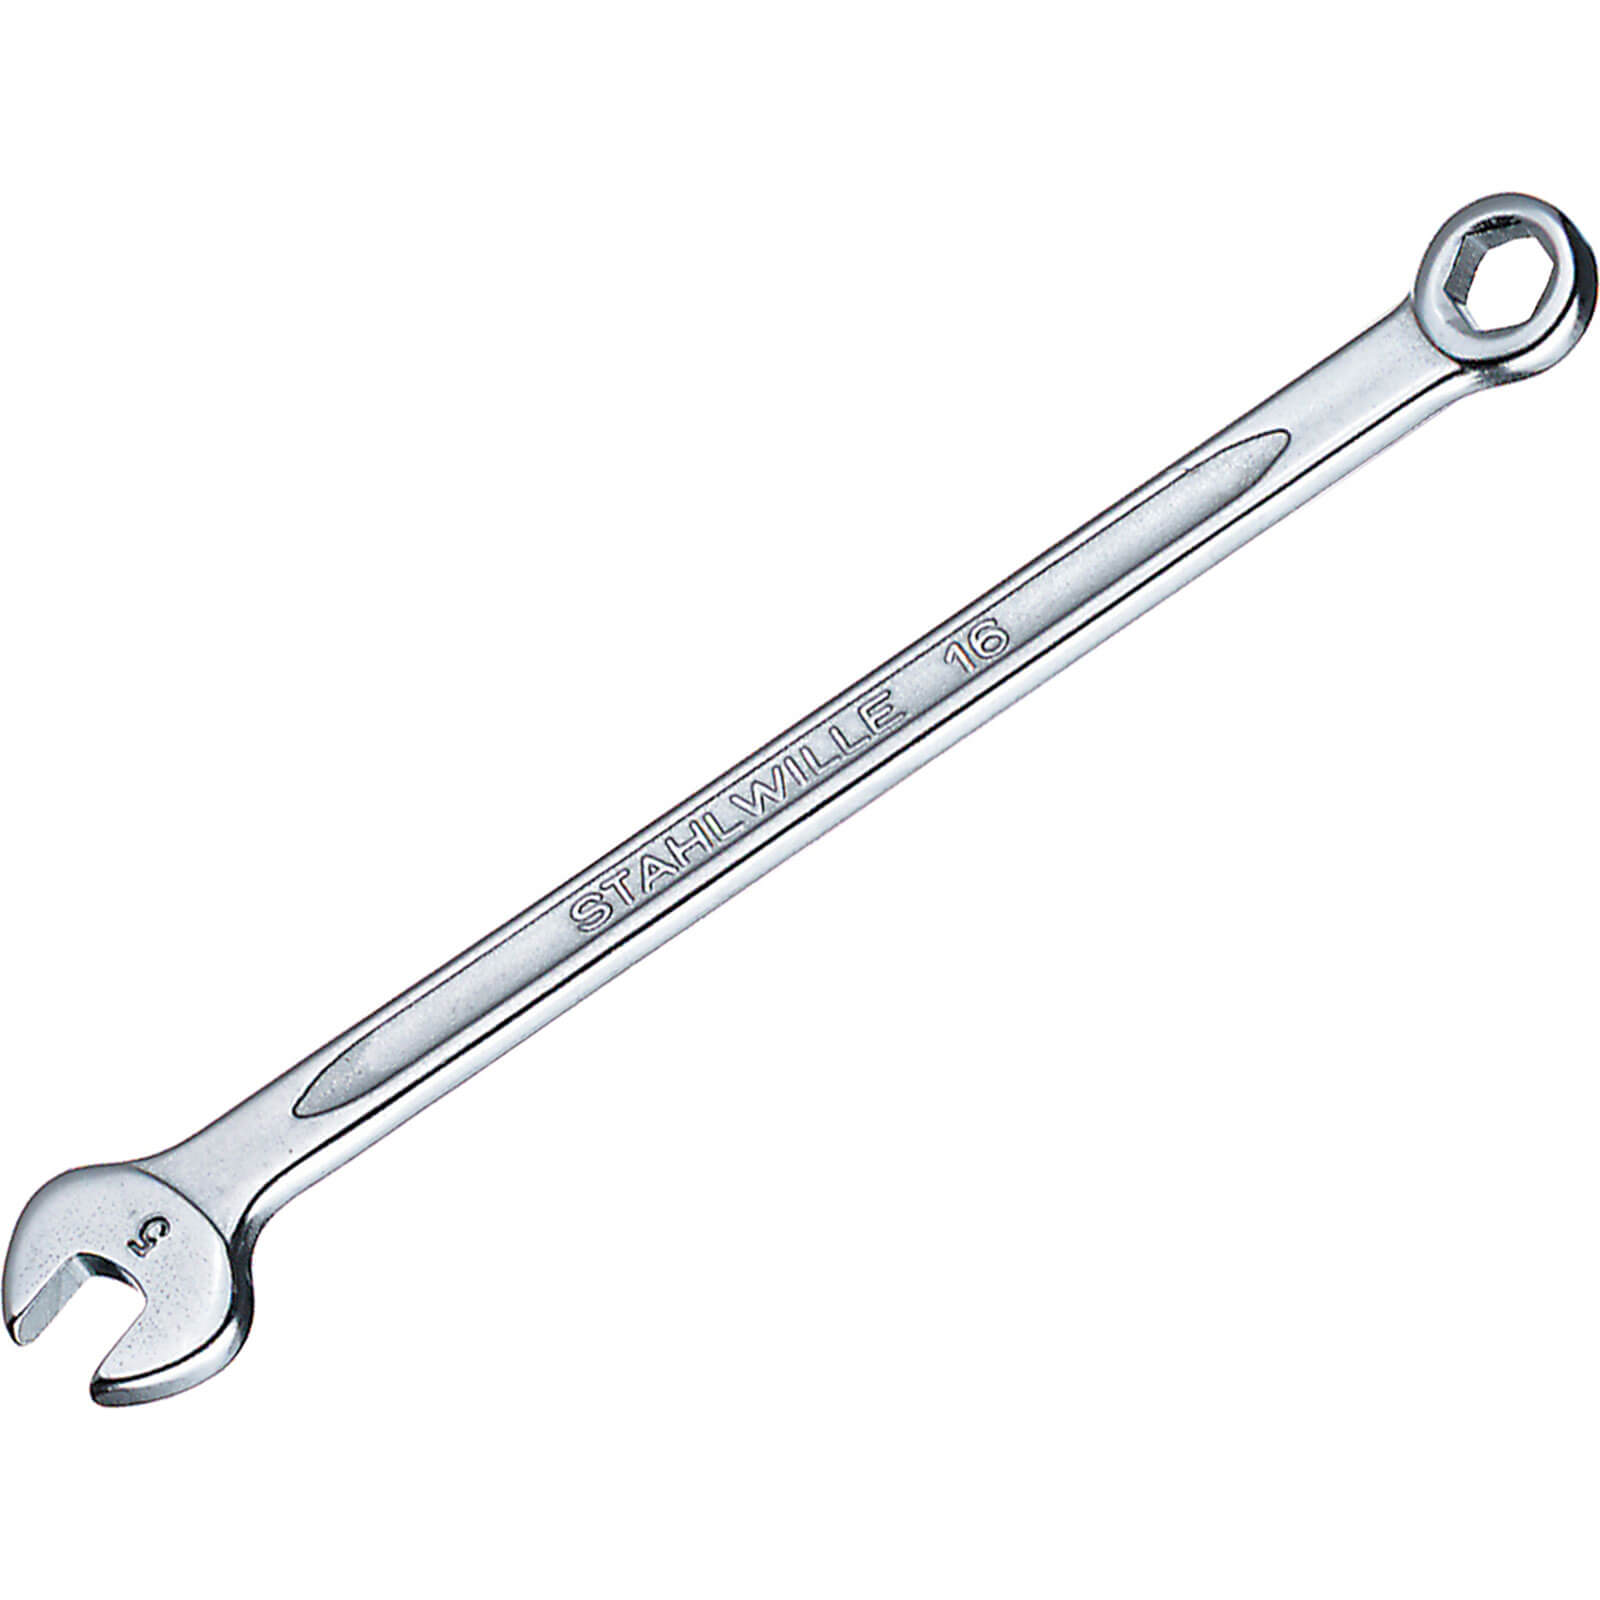 Image of Stahlwille 16 Series Midget Combination Spanner Metric 3.5mm